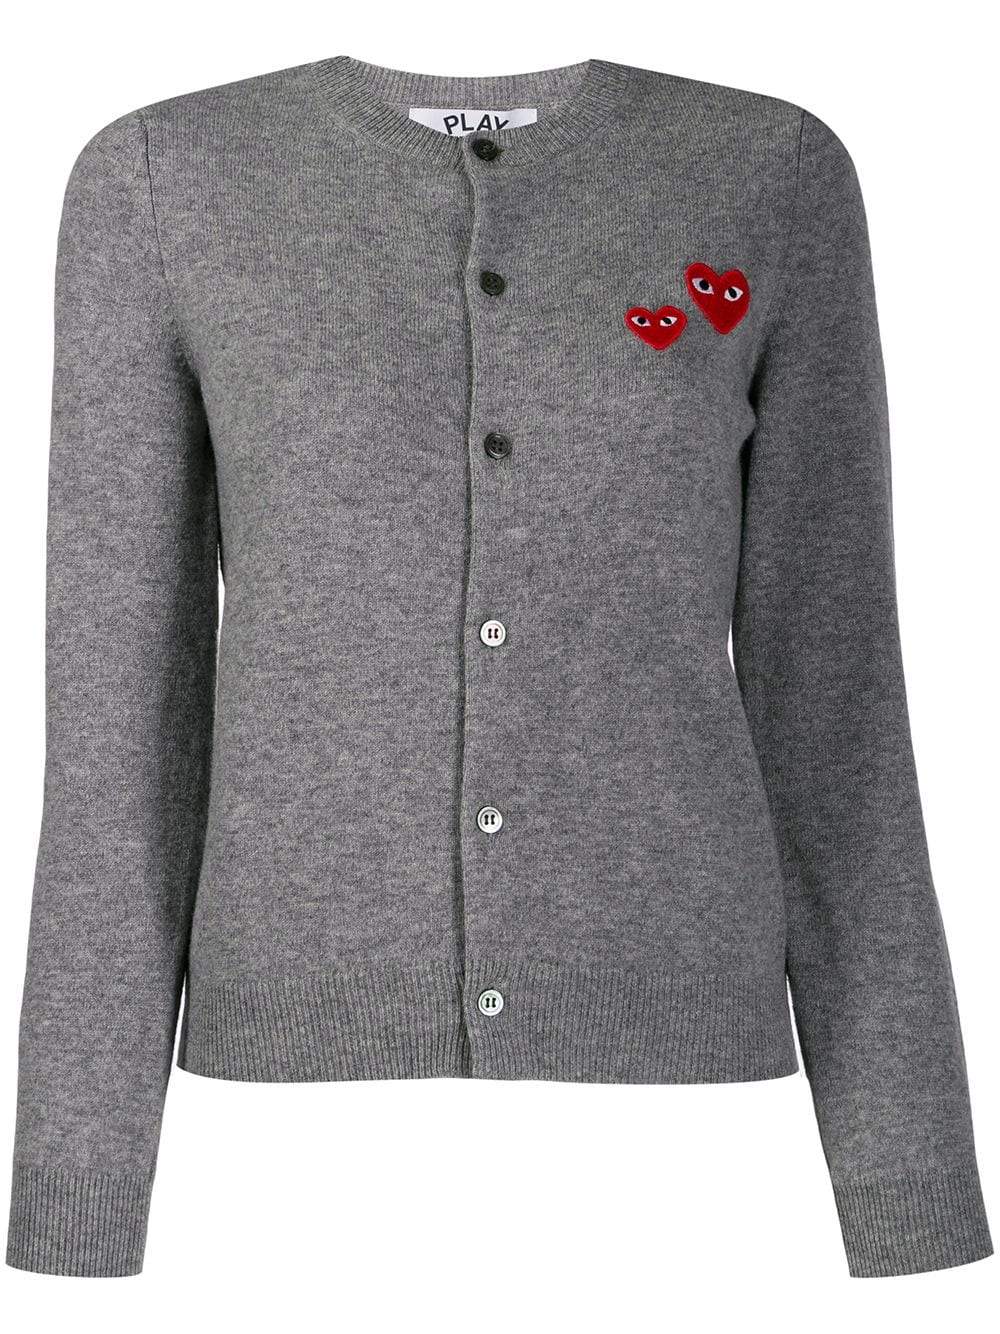 Comme Des Garçons Play embroidered cardigan - Grey von Comme Des Garçons Play